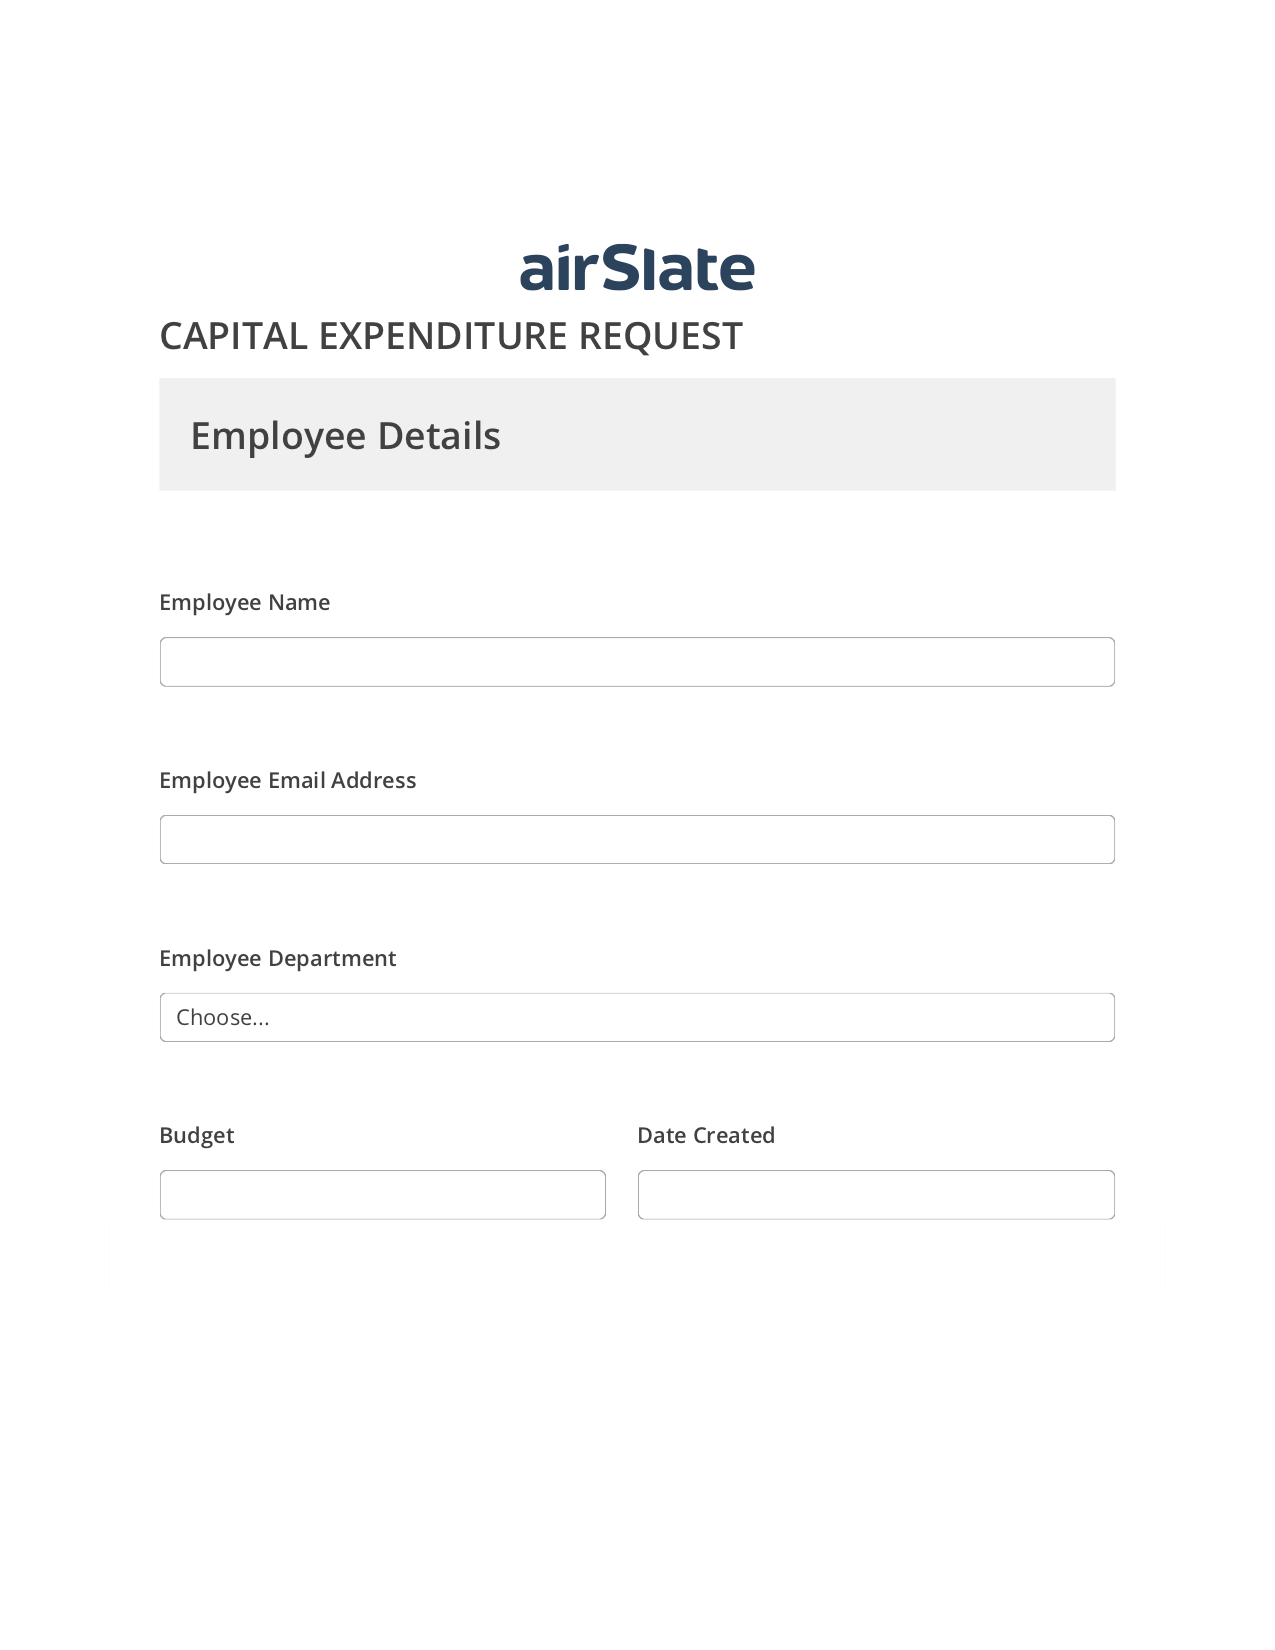 Capital Expenditure Request Approval Flow Email Notification Bot